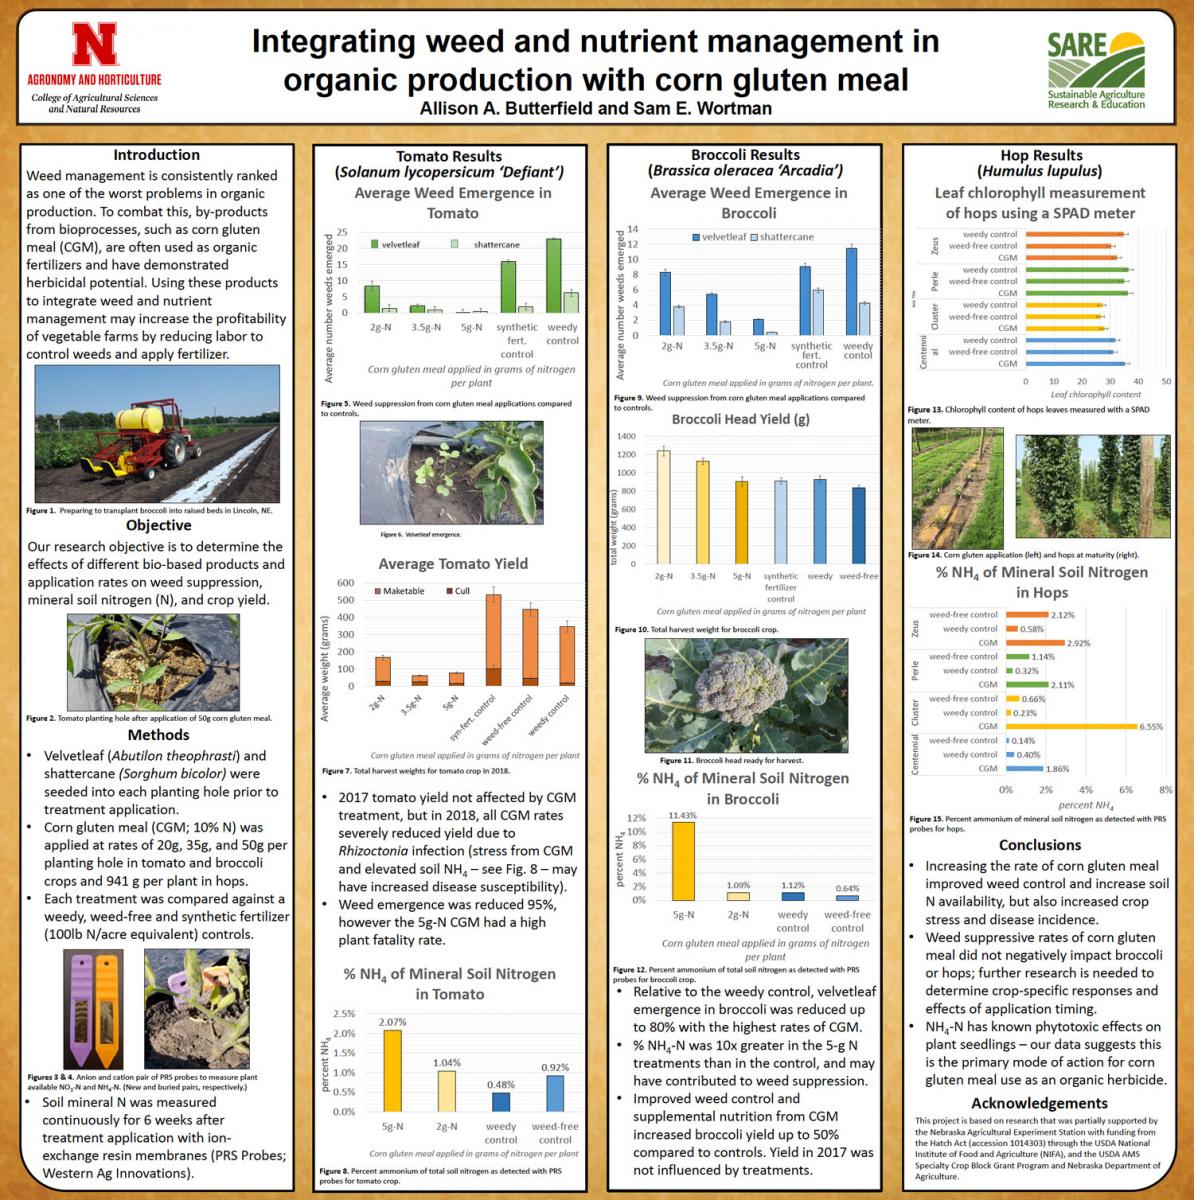 Integrating weed and nutrient management in organic production with corn gluten meal